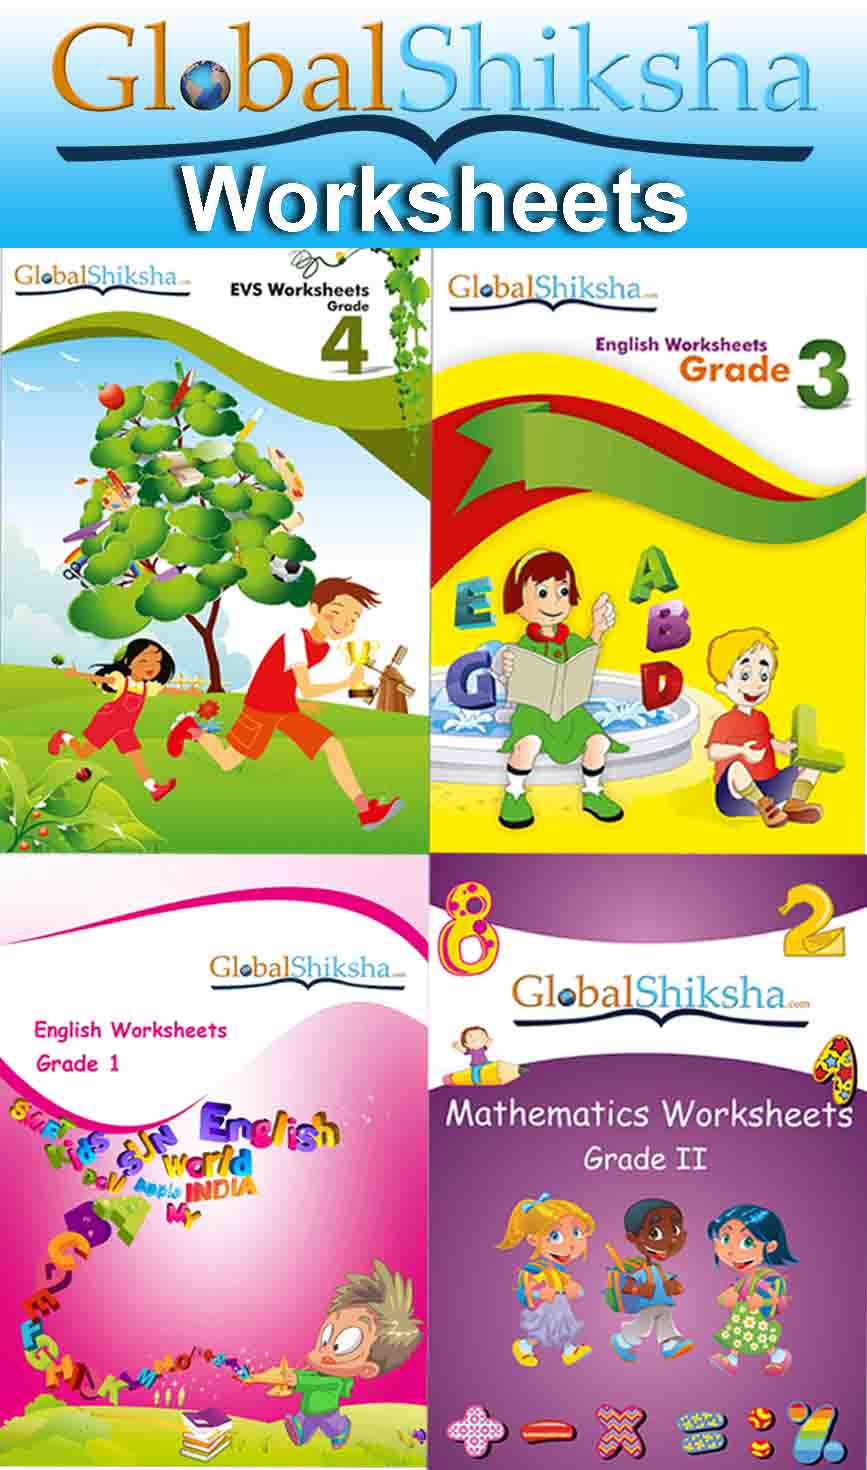 Malayala Padavali-LKG - PDF books with free ebook downloads available alphabet worksheets, education, learning, and math worksheets Worksheets For Lkg 2 1470 x 867